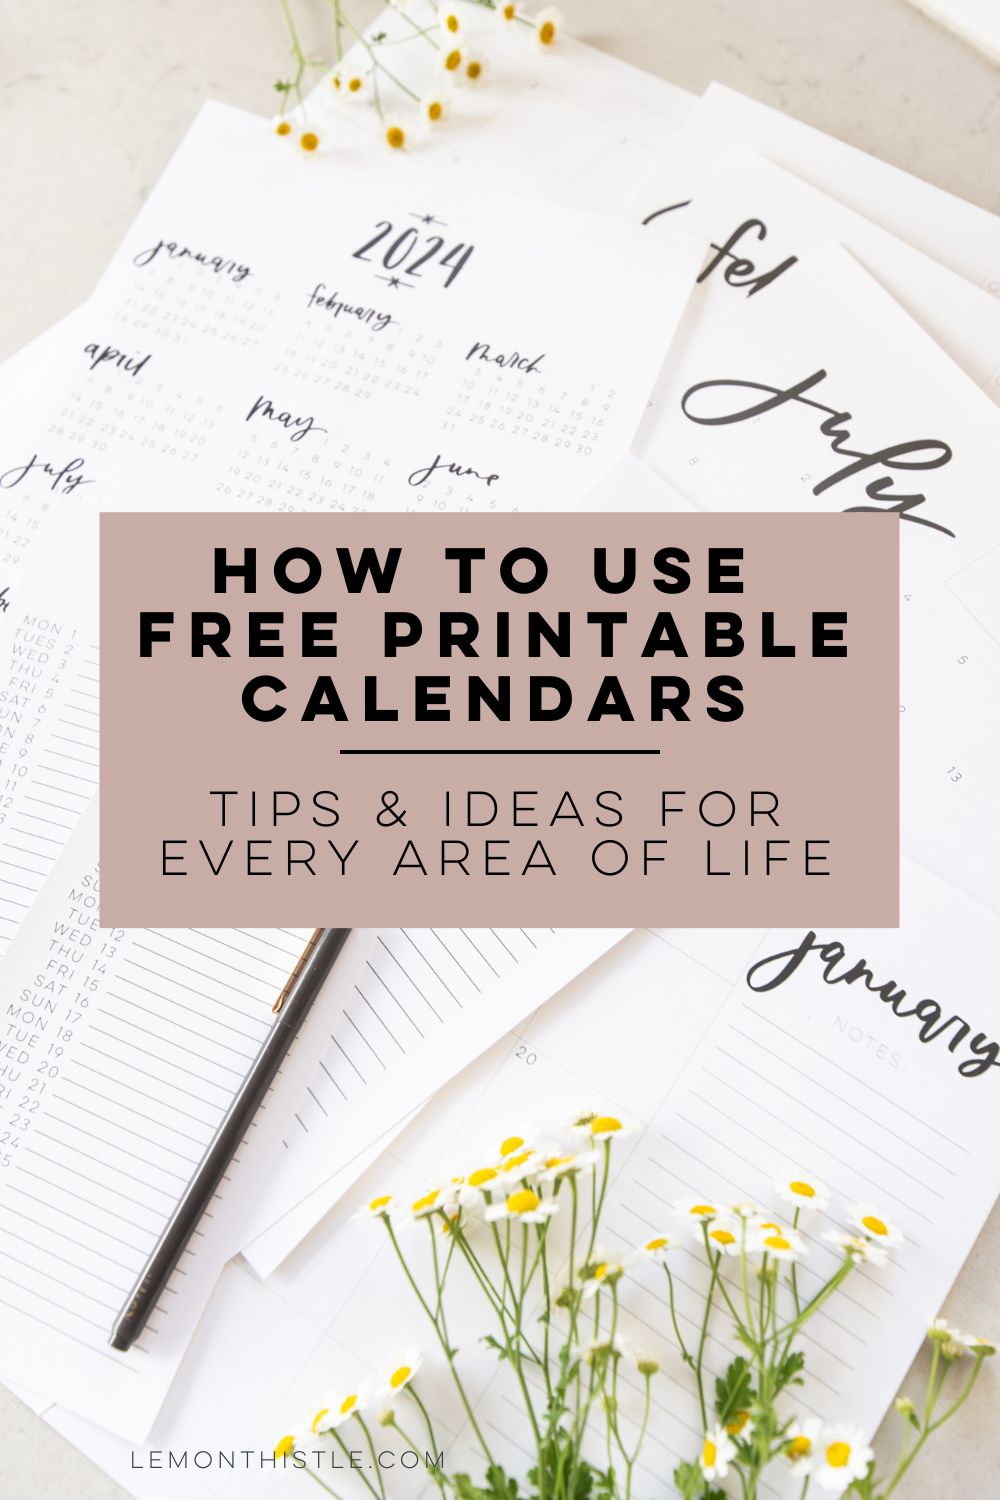 how to use free printable calendars - tips and ideas for every area of your life, text over image of a stack of calendars in various formats